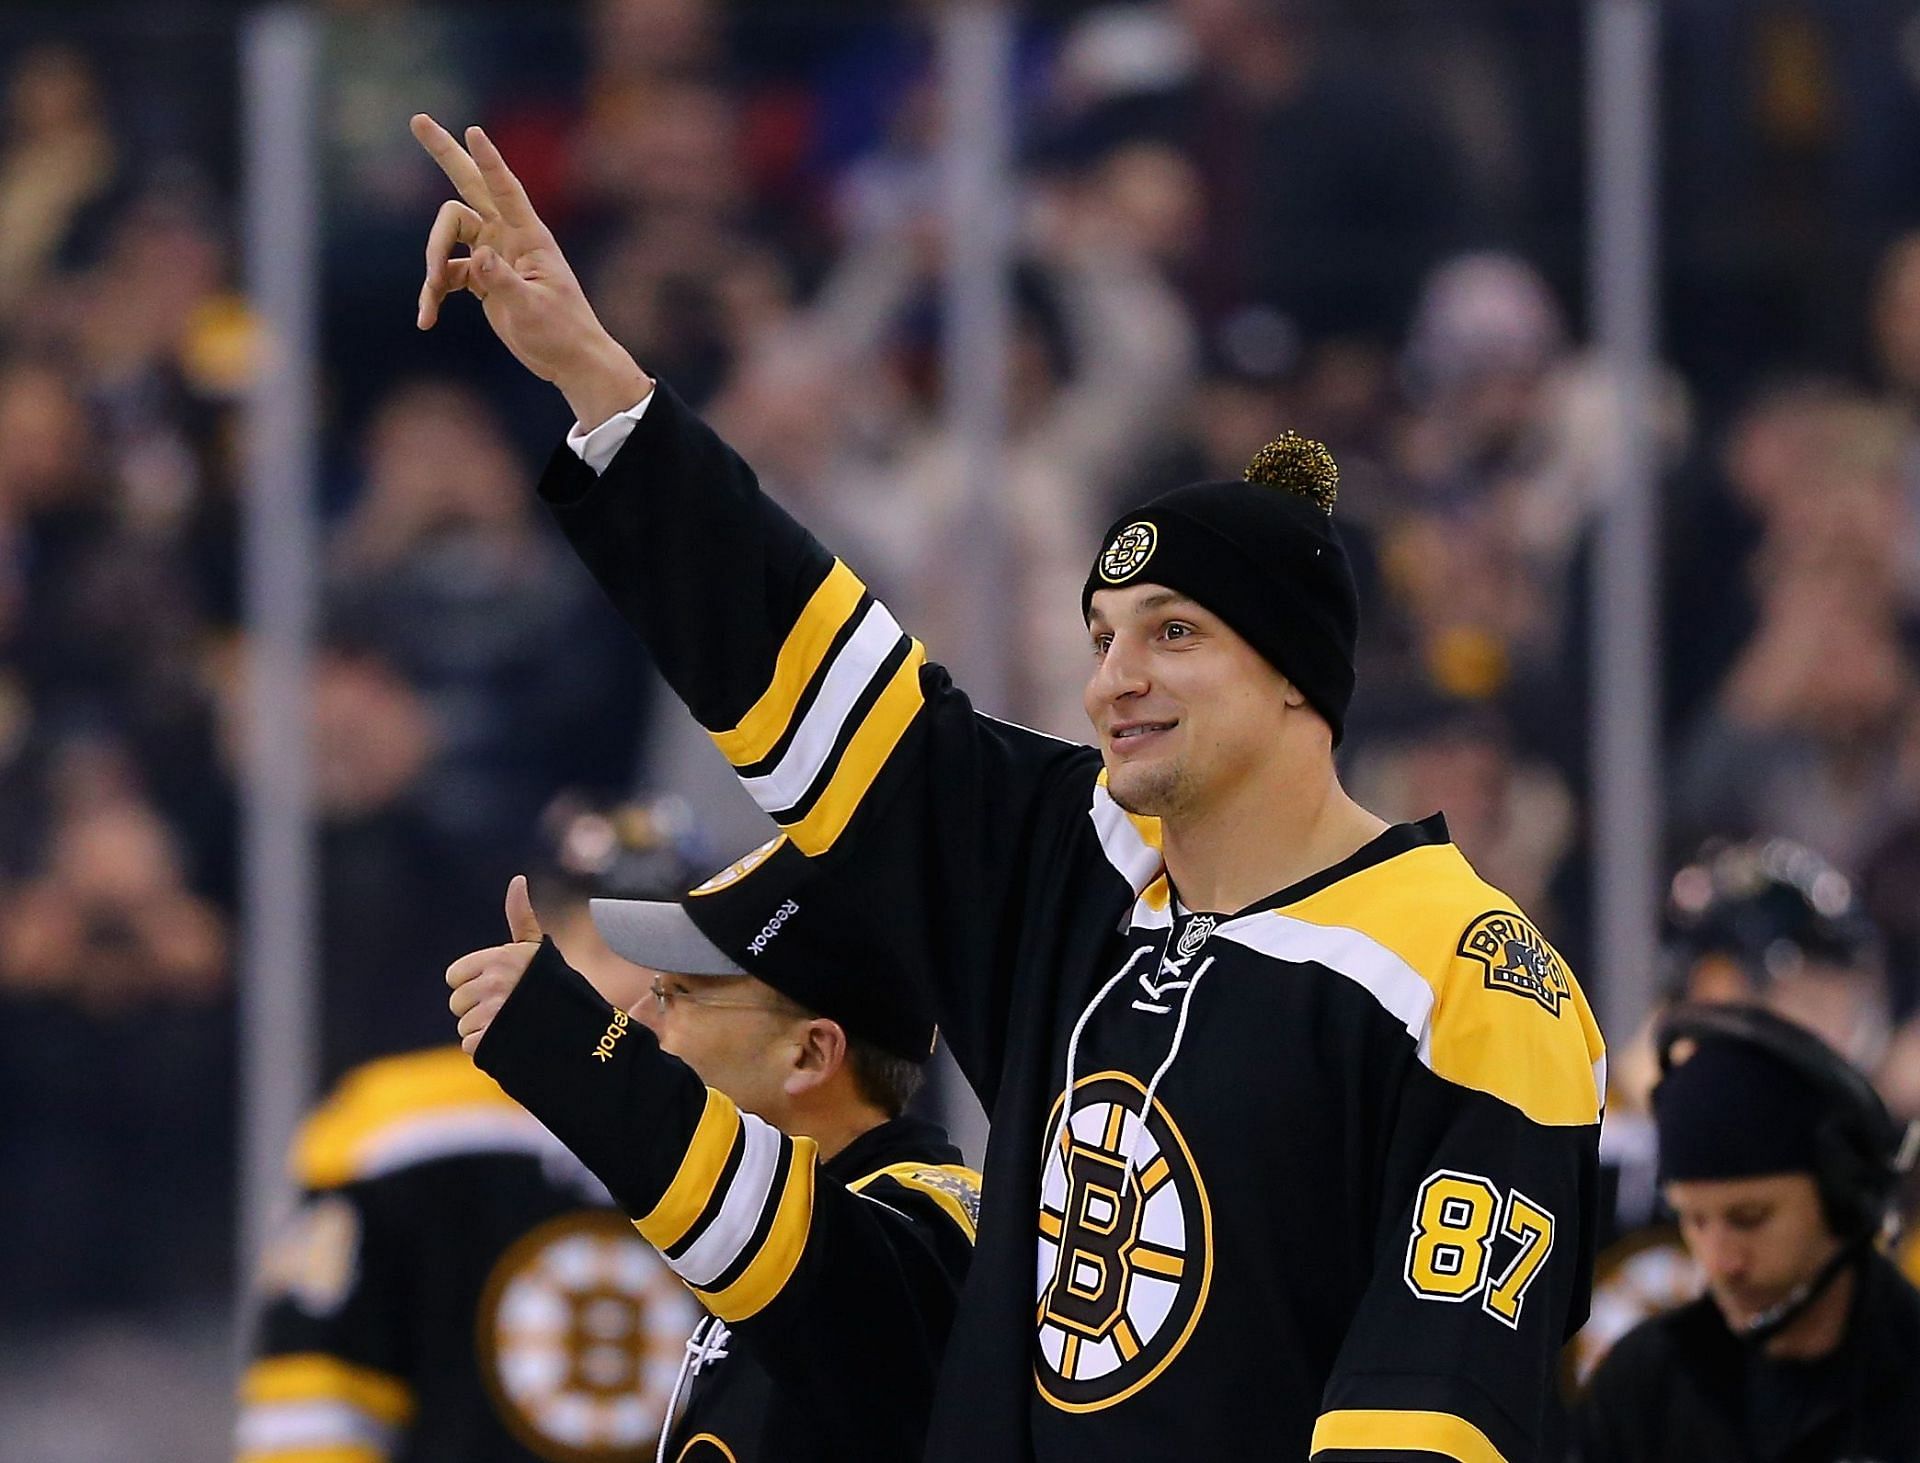 Gronkowski attends a Boston Bruins game